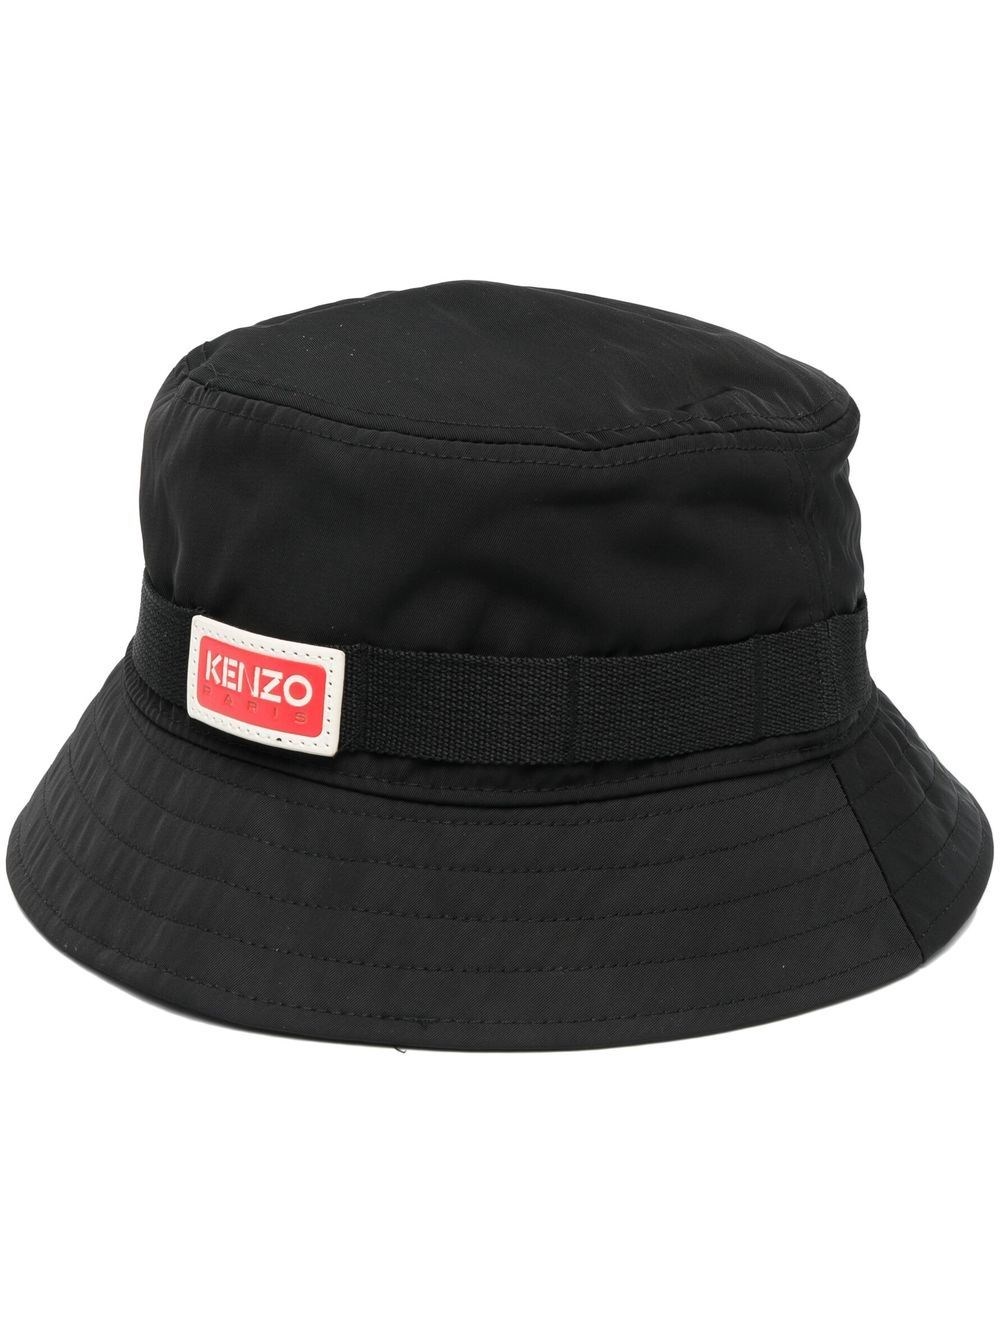 Kenzo Bucket Hat With Print In Black